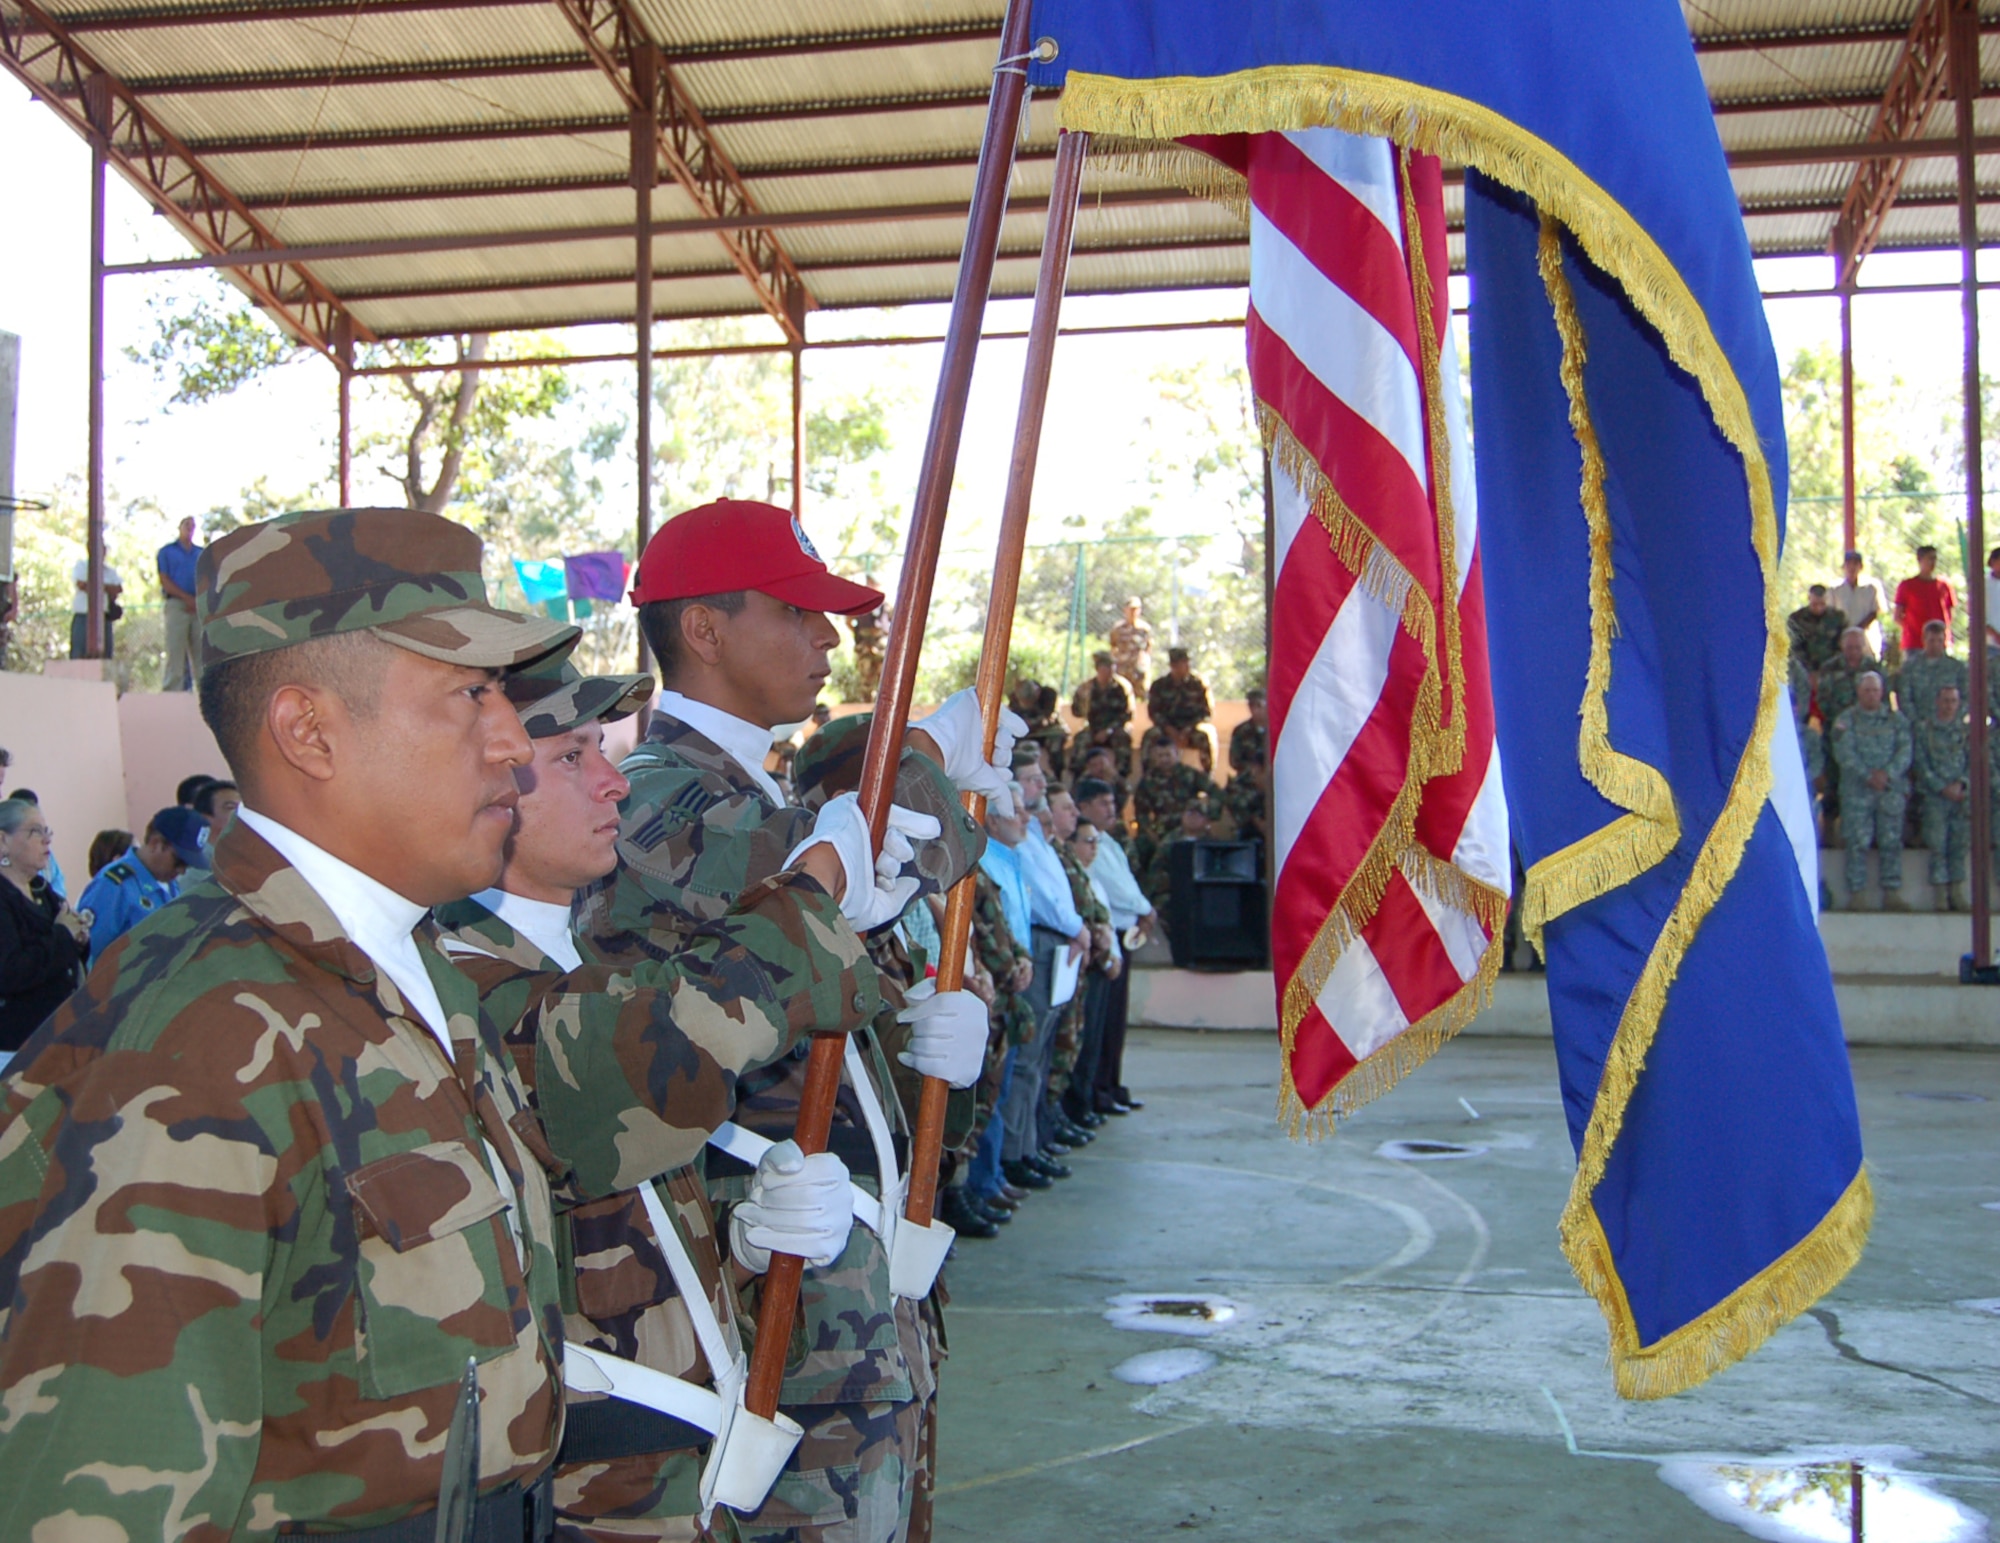 Senior Airman Jesus Cortez, member of the 820th Expeditionary Red Horse Squadron out of Nellis Air Force Base, Nev., along with Nicaraguan army Sgt. 3rd Class Juan Ramon Bado and Soldiers Marcos Mercado and Vladmir Perez, present flags from both countries during the New Horizons - Nicaragua 2007 opening ceremonies Feb. 15. (U.S. Air Force photo/Senior Airman Jacque Lickteig)